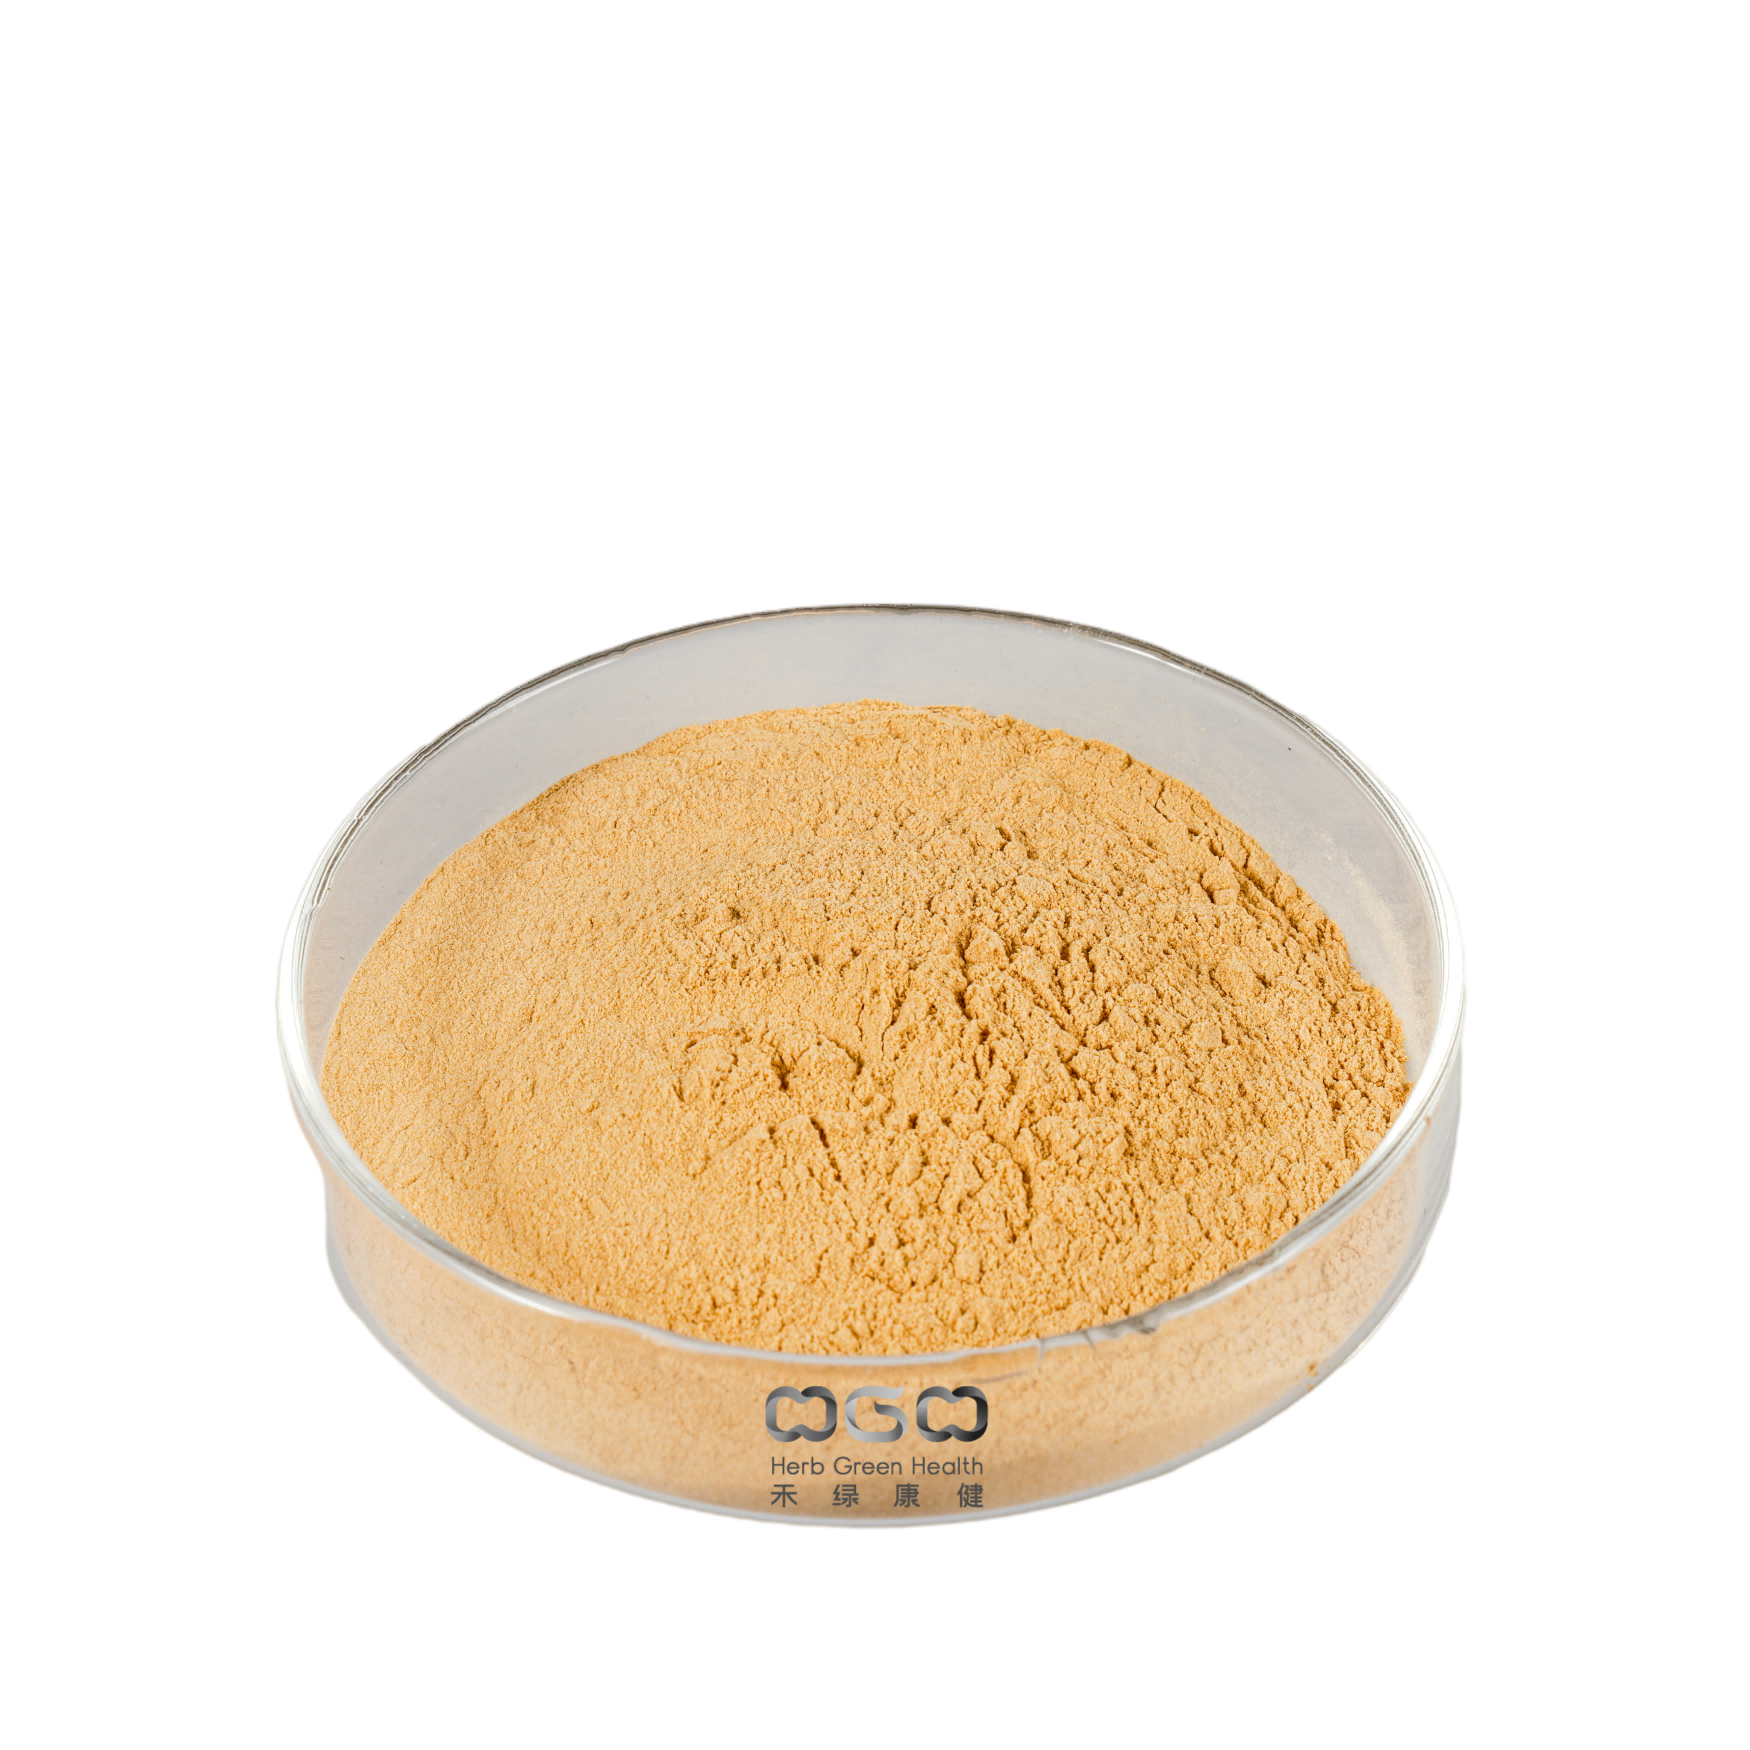 Factory Price Anti-inflammatory Andrographis Extract Powder